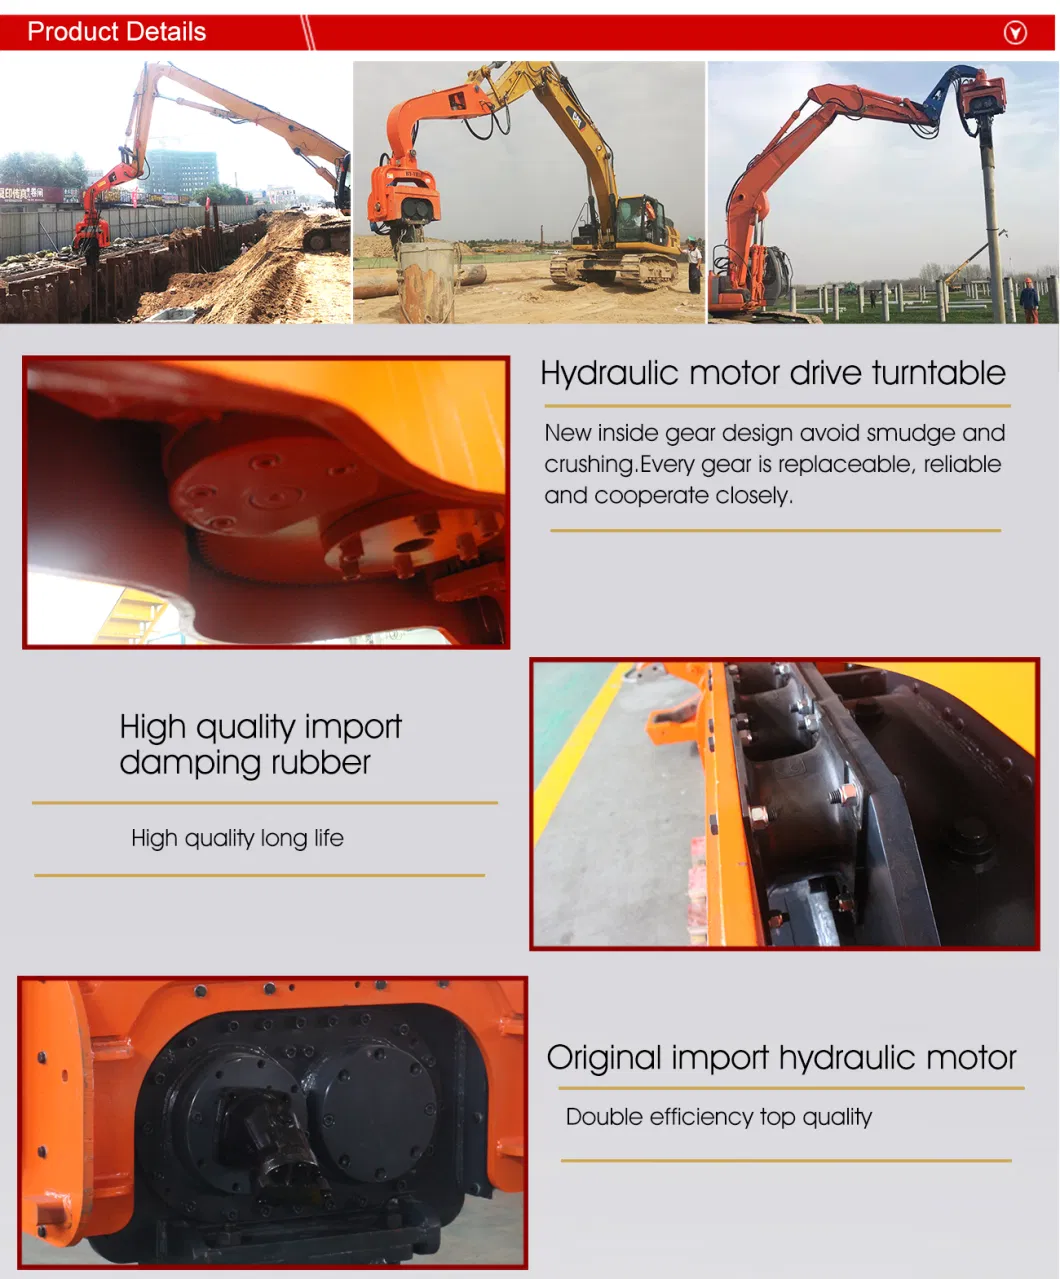 How to Driver Steel Pipe/Tube Pile? Please Pay Close Attention to Beiyi Vh-350 Pile Driver!